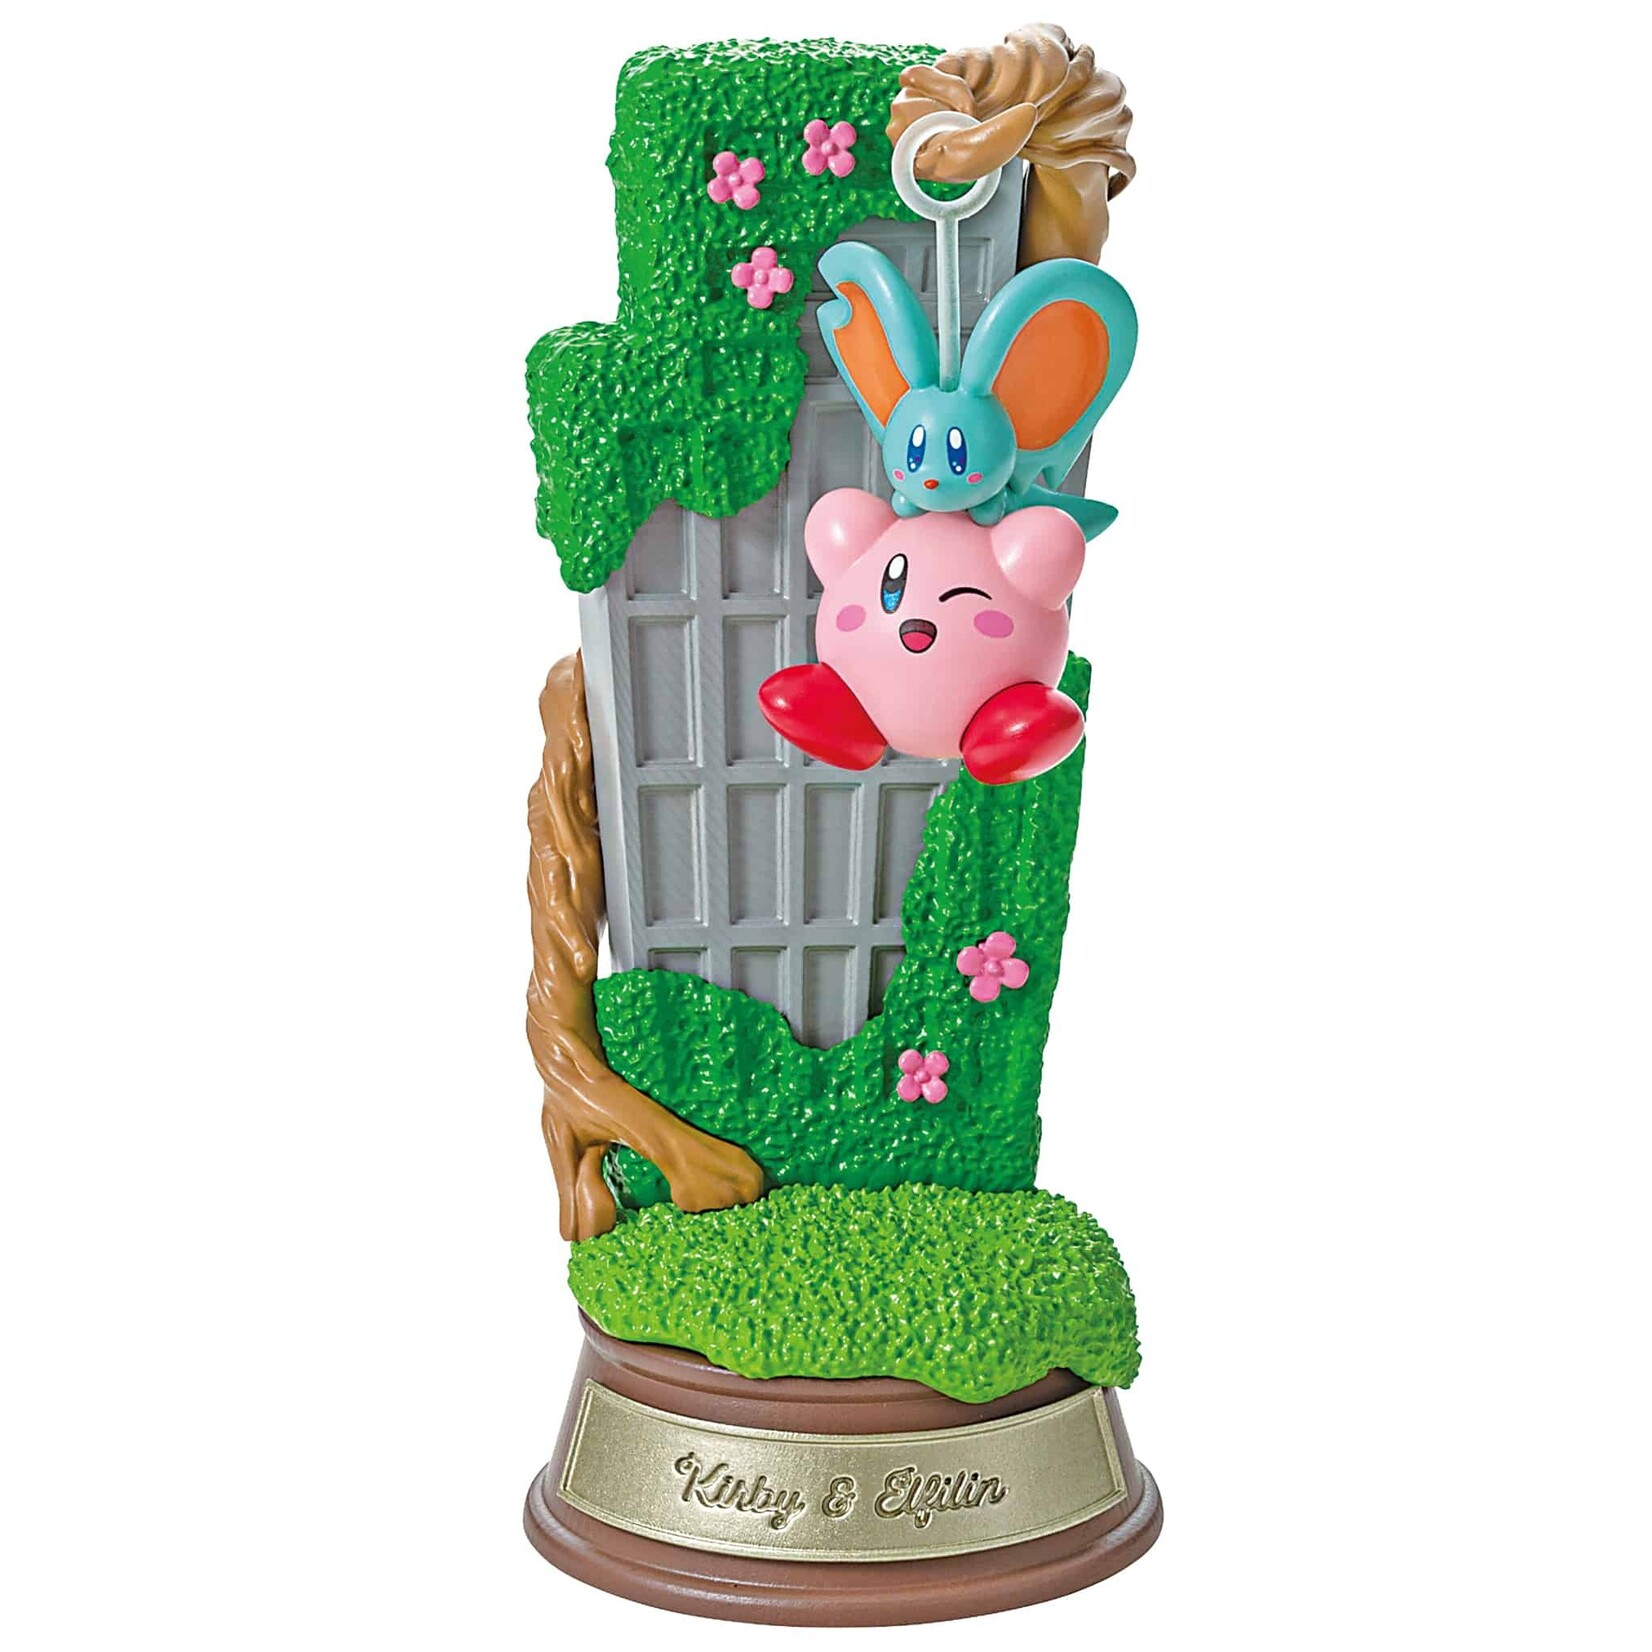 Re-Ment Blind Box - Re-Ment - Swing Kirby in Dream Land RM-001